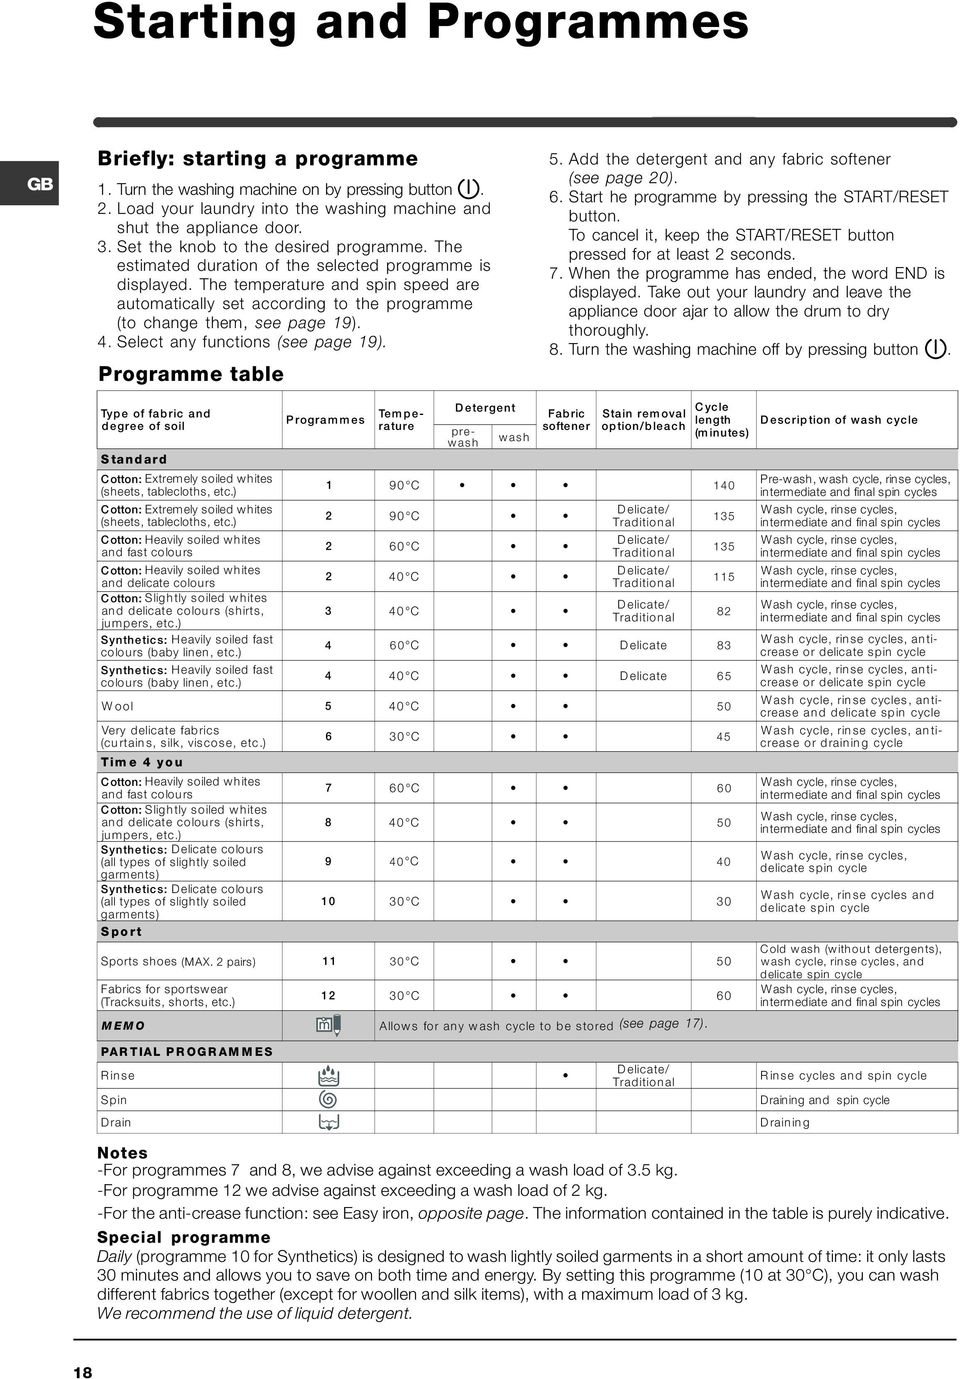 The temperature and spin speed are automatically set according to the programme (to change them, see page 19). 4. Select any functions (see page 19). Programme table 5.